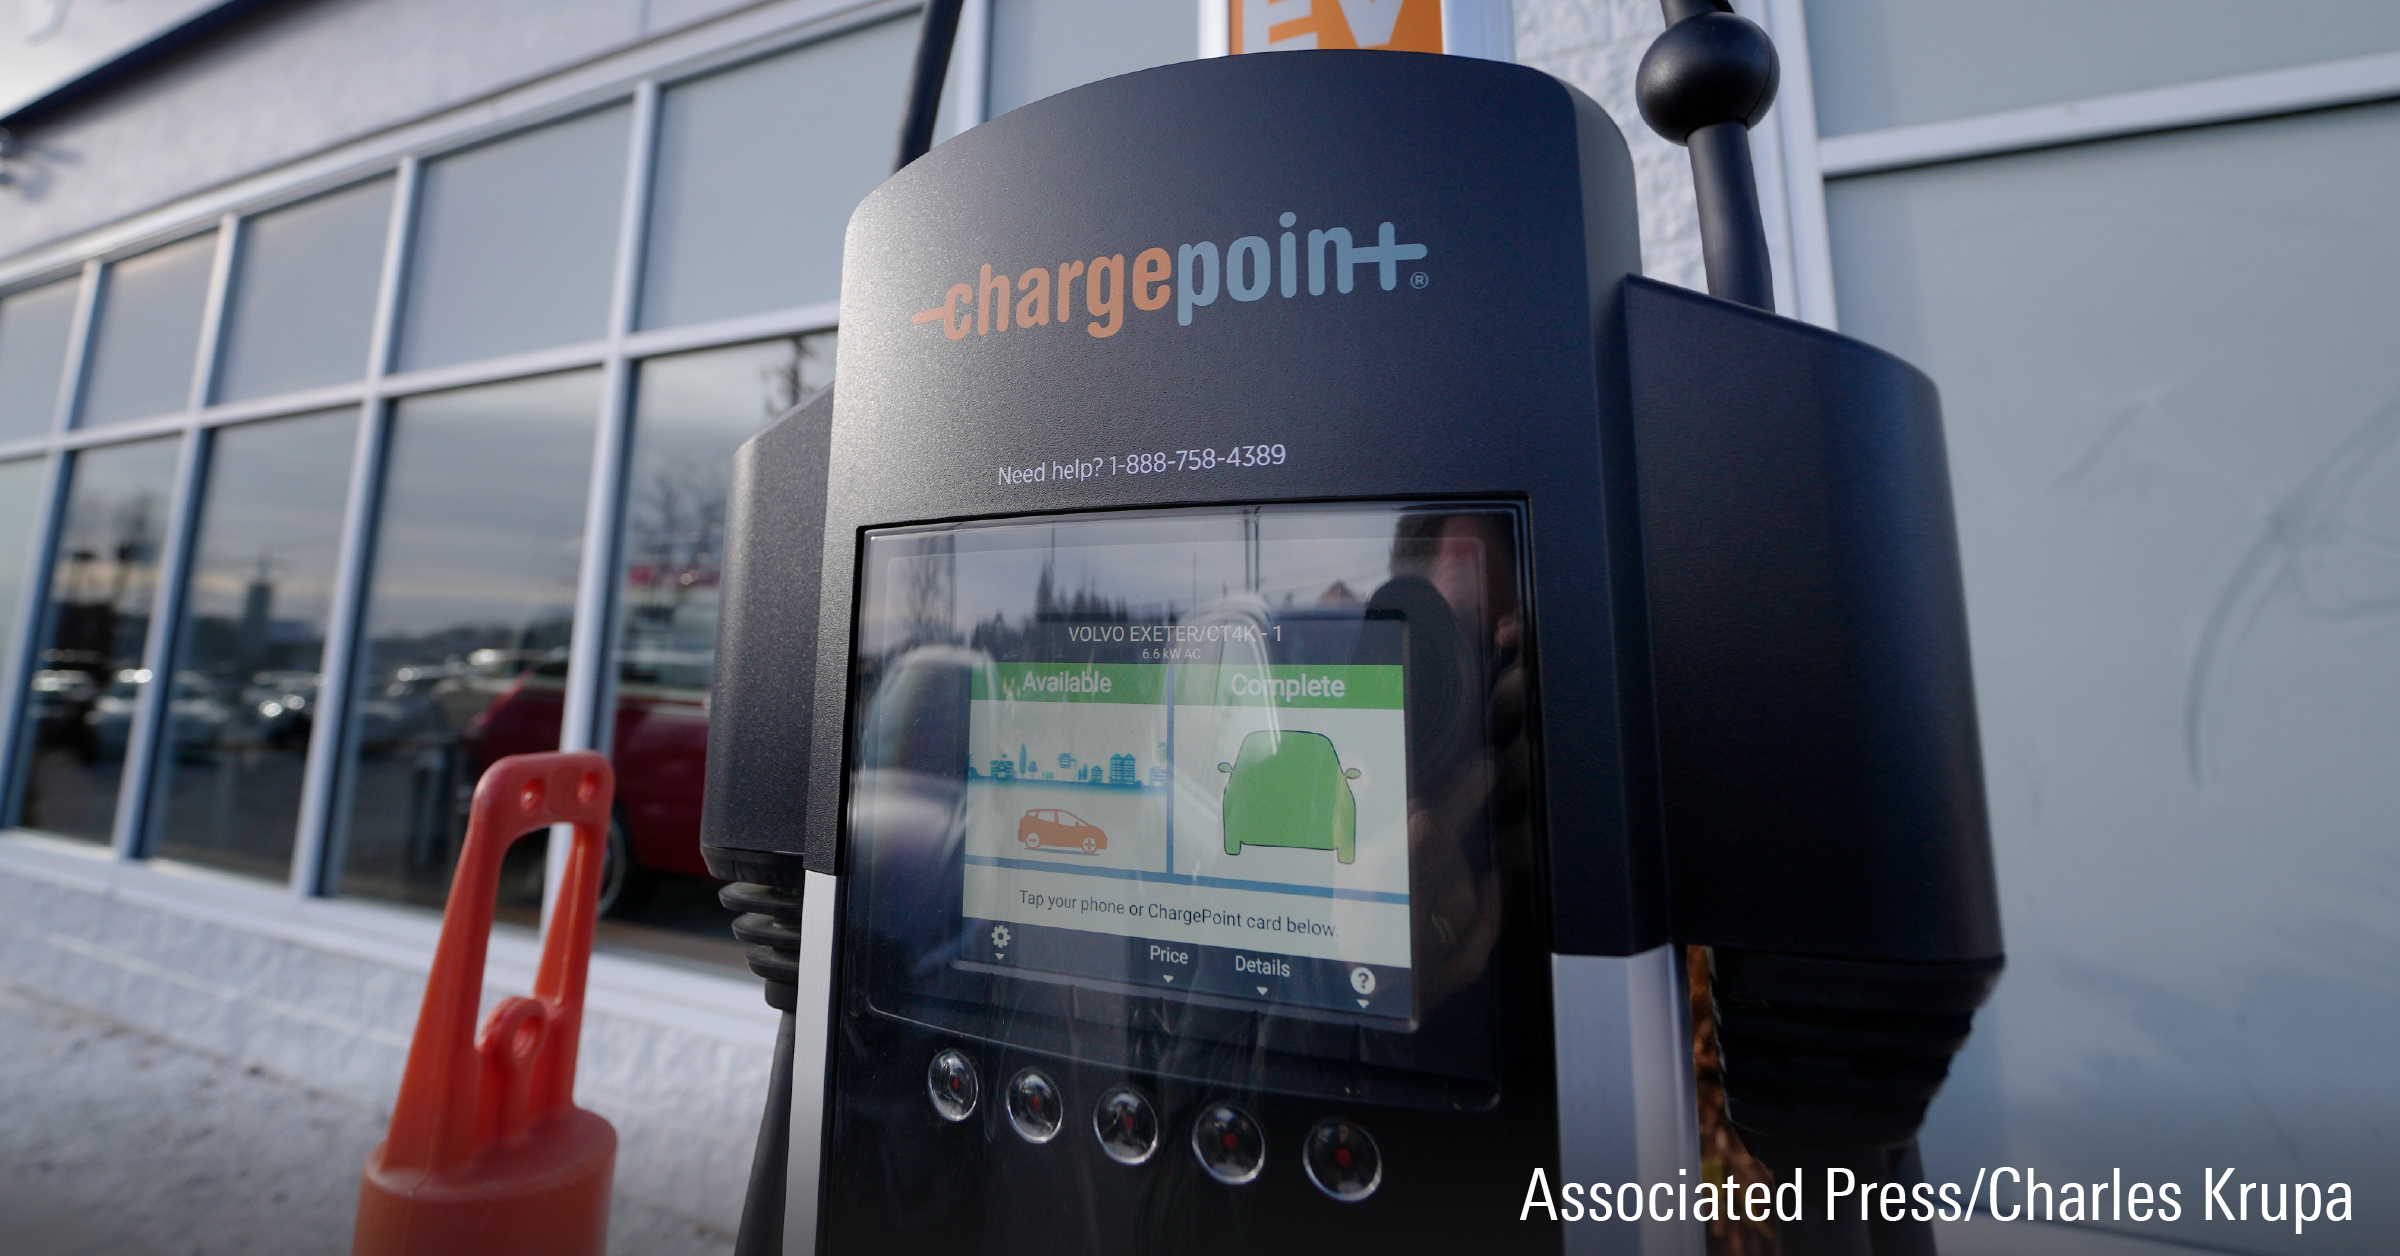 A ChargePoint electric vehicle charging station.